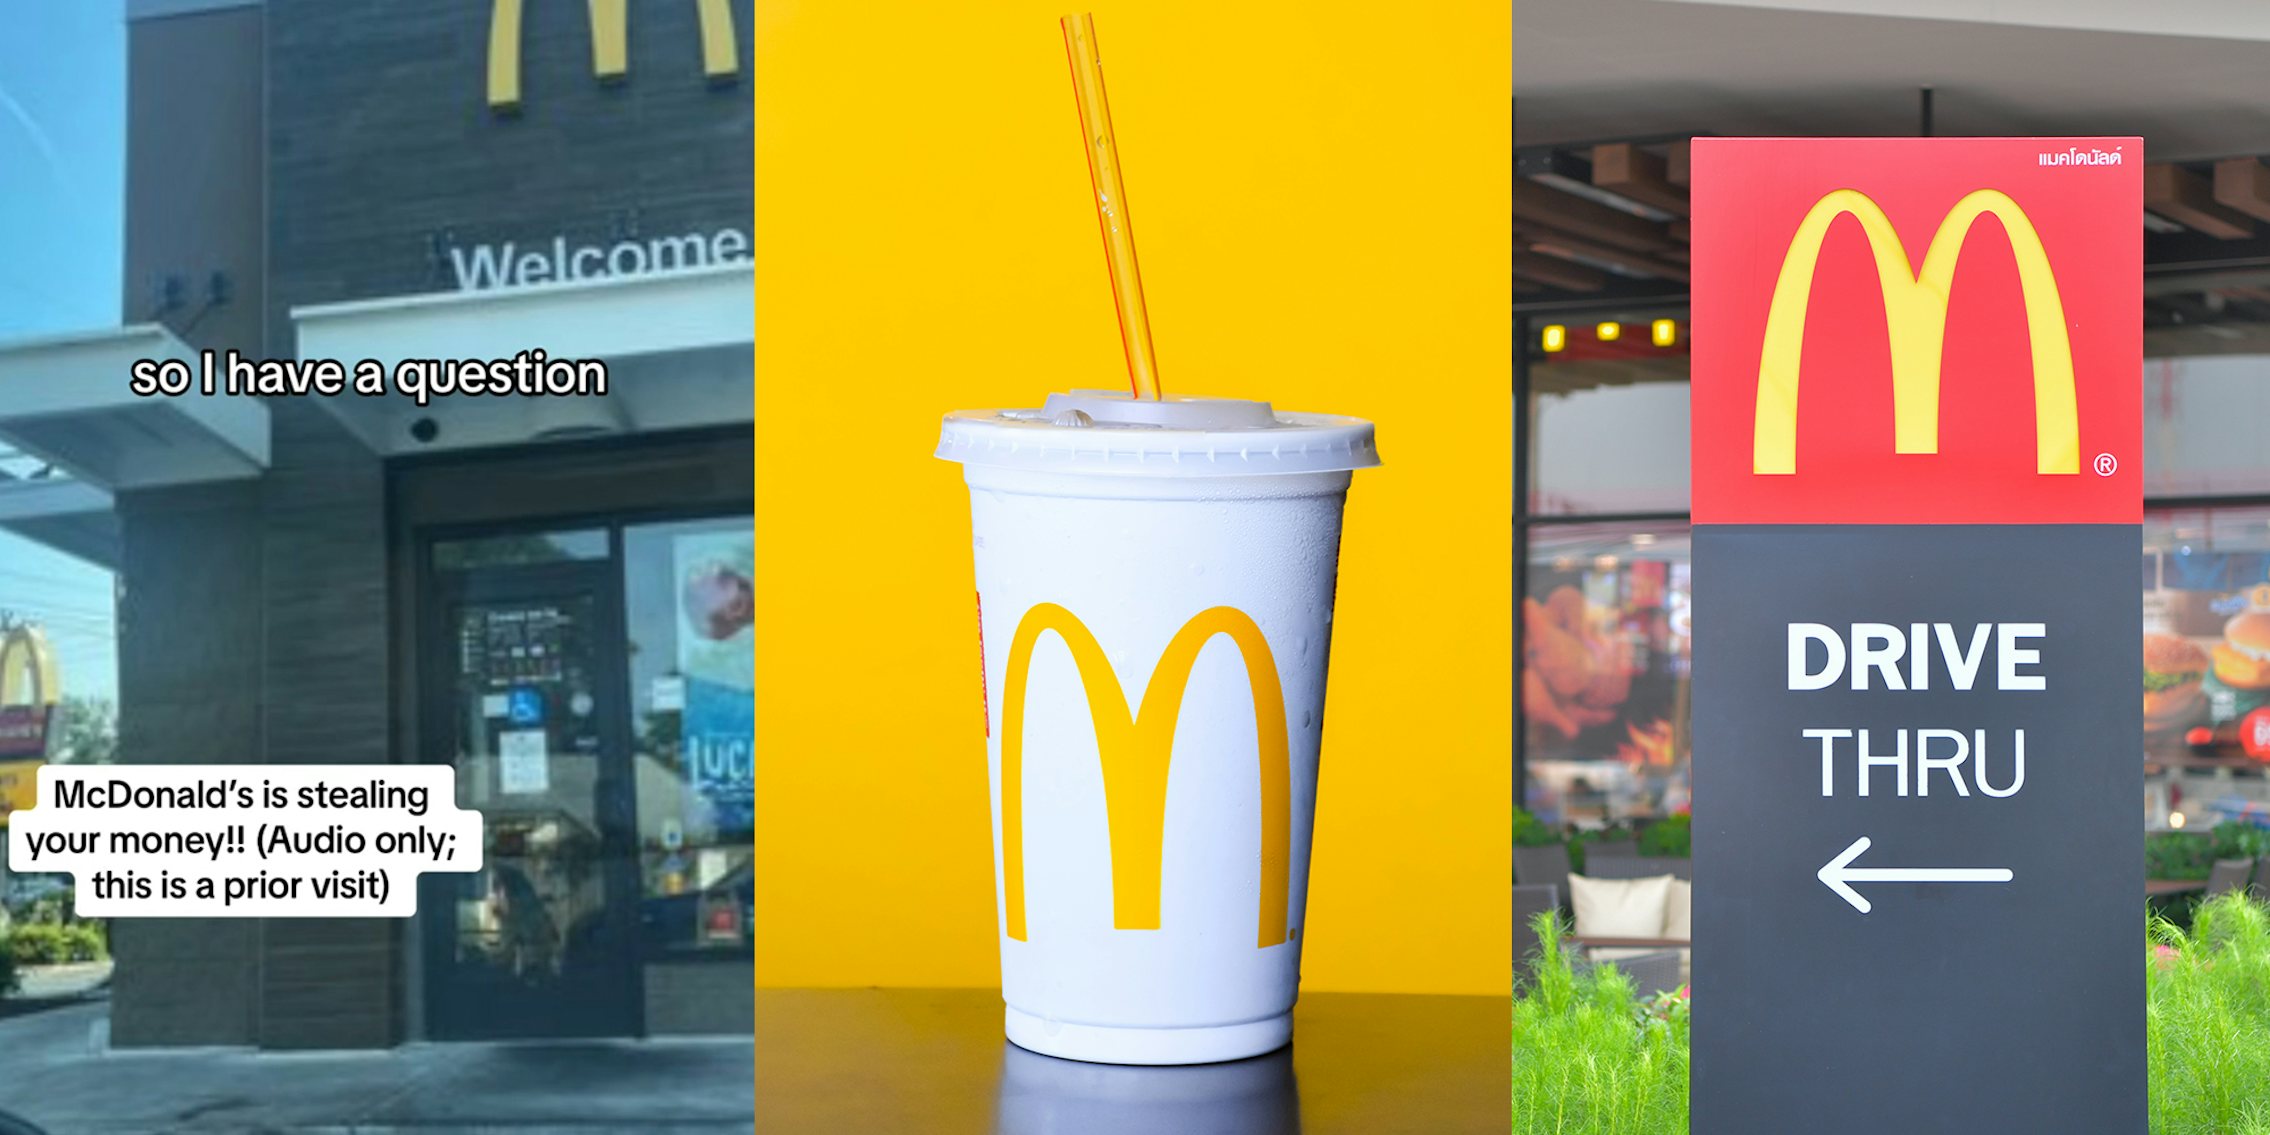 McDonald’s worker automatically charges customer for large drink, says that’s the default if customer doesn’t specify